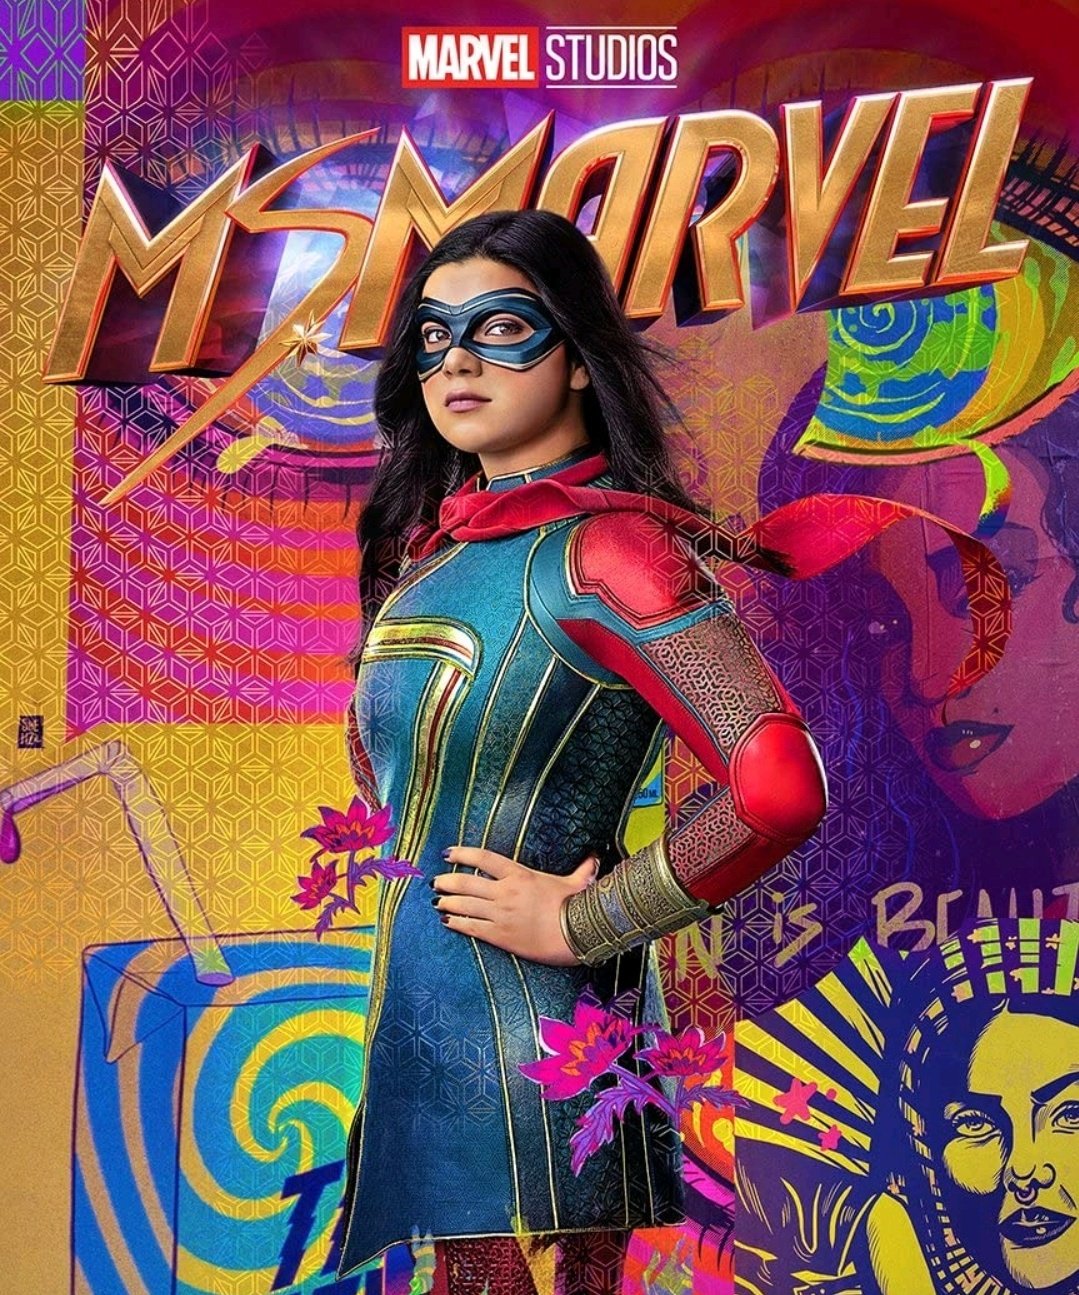 The Highest Rated Marvel Series On Rotten Tomatoes is 'Ms. Marvel'